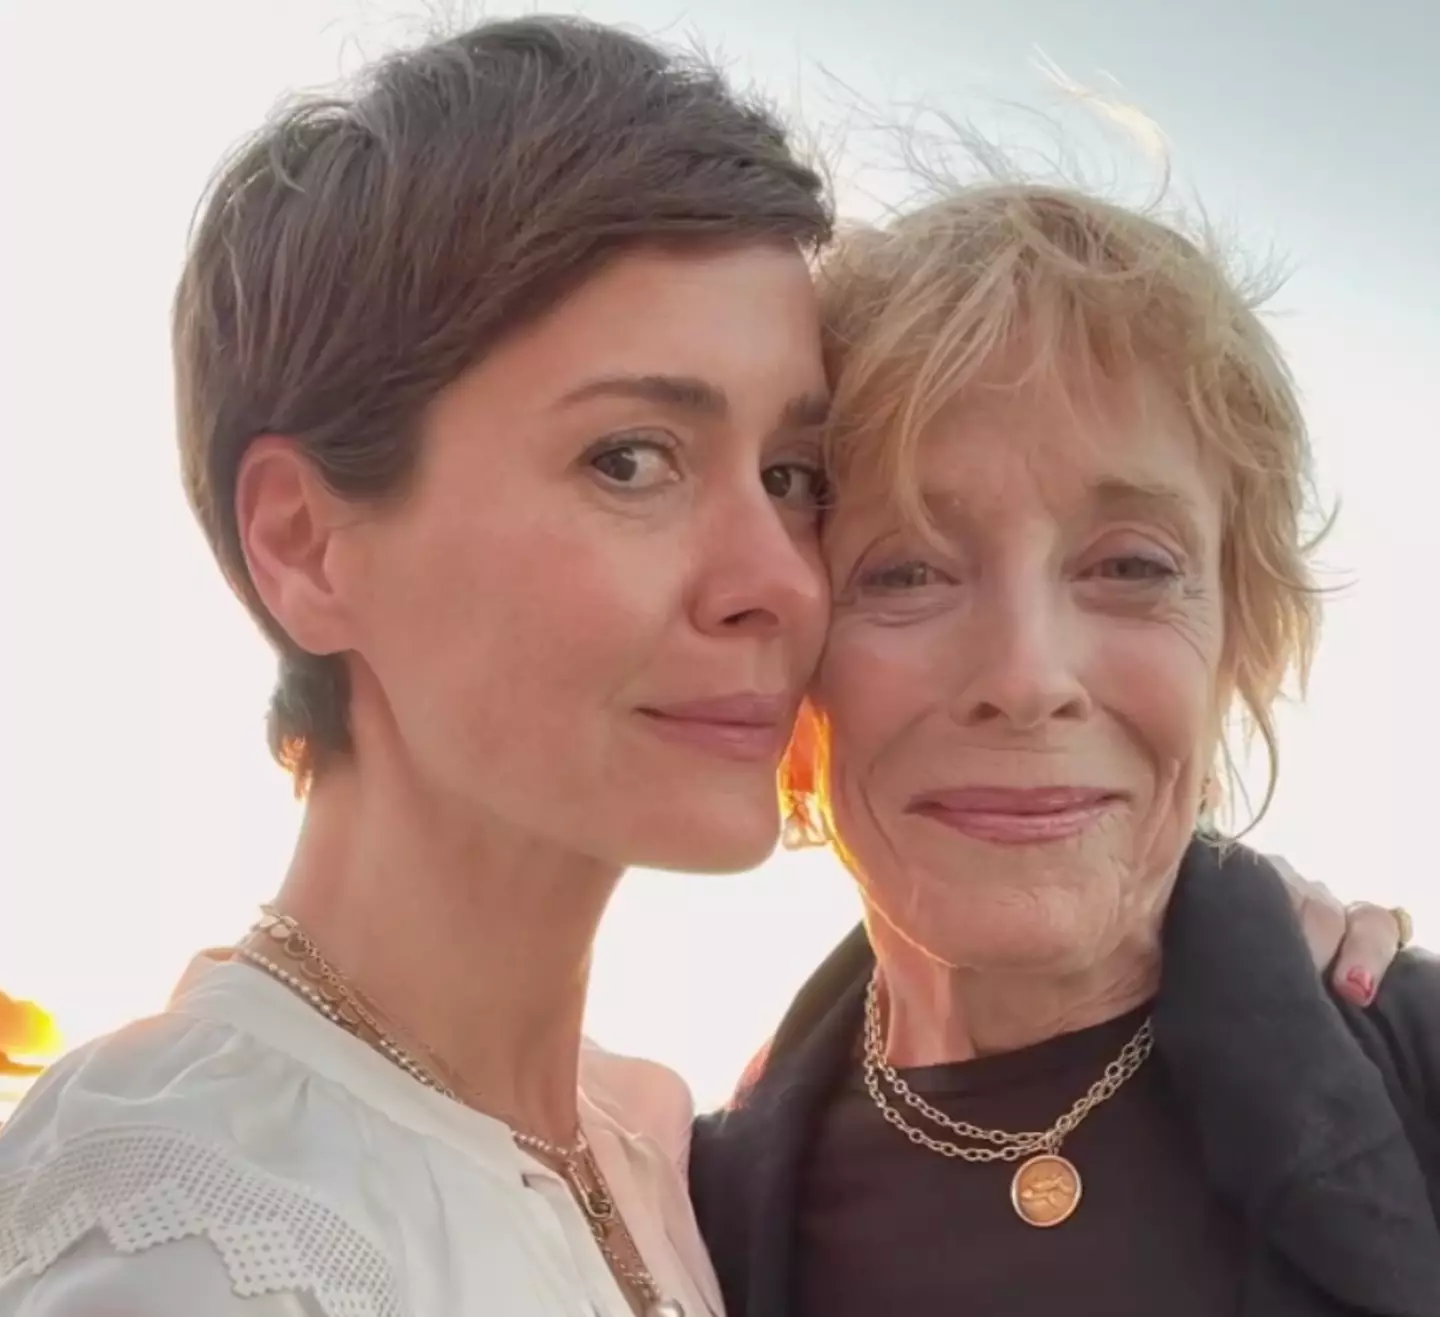 Sarah Paulson and Holland Taylor announced their relationship in 2015.